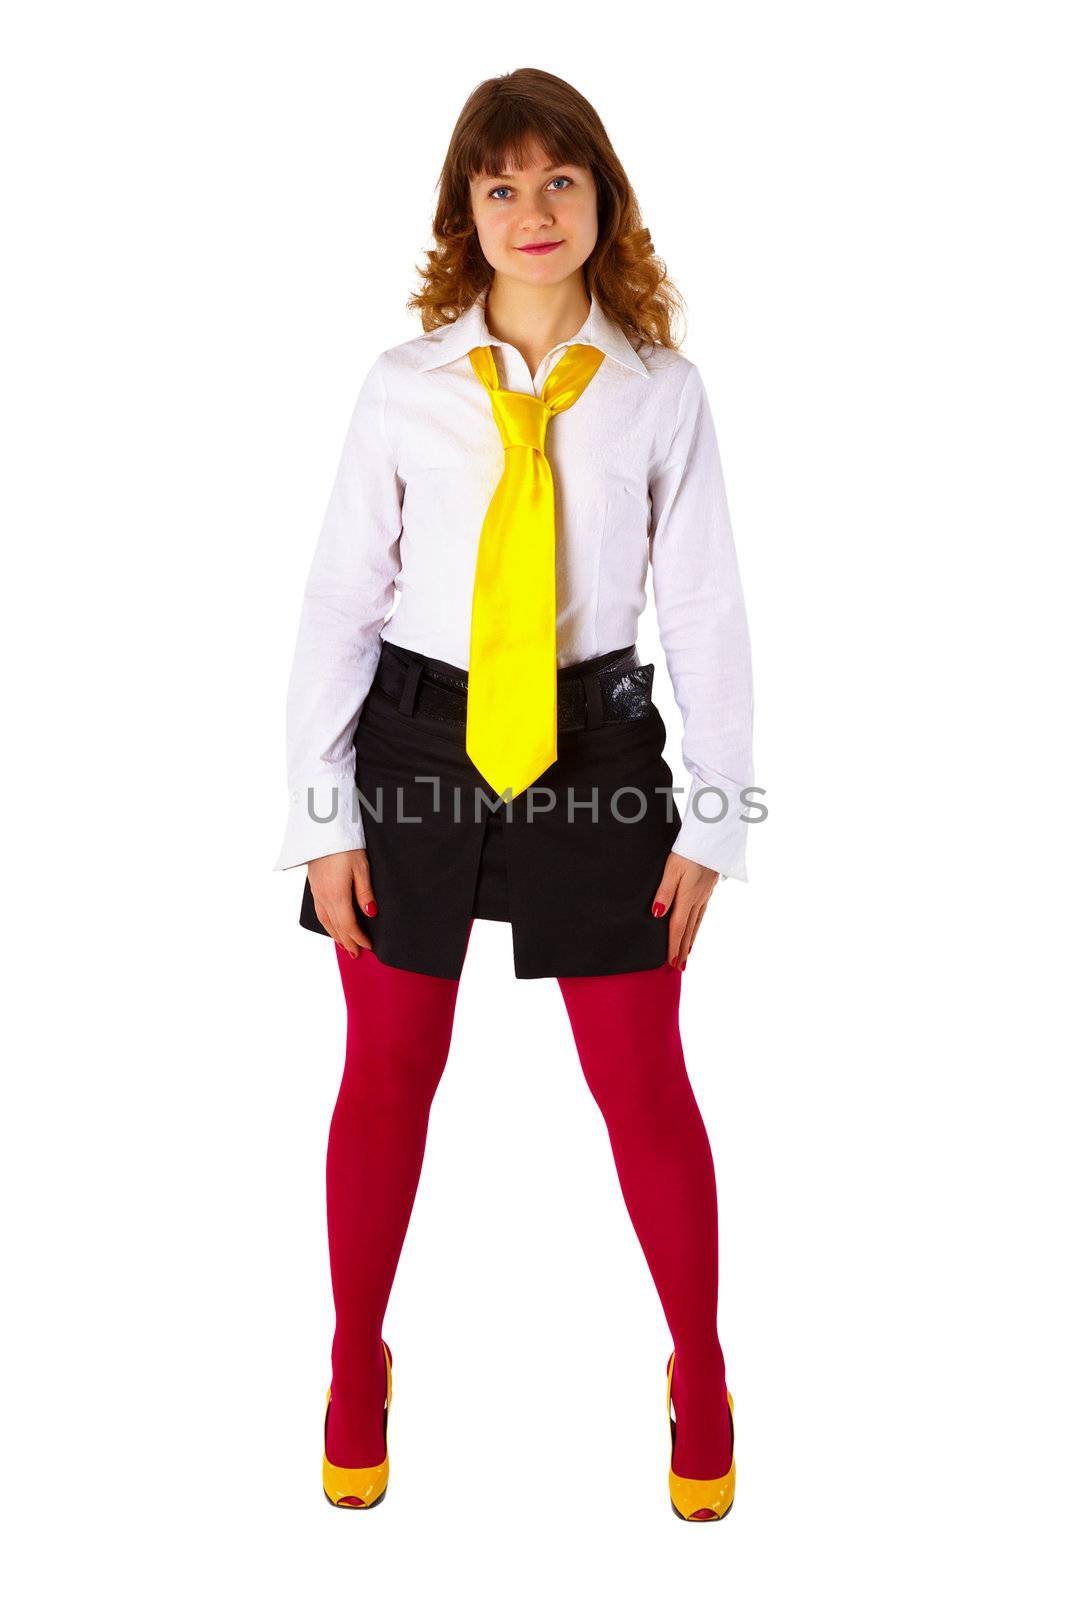 Young girl in red stockings and a yellow tie by pzaxe